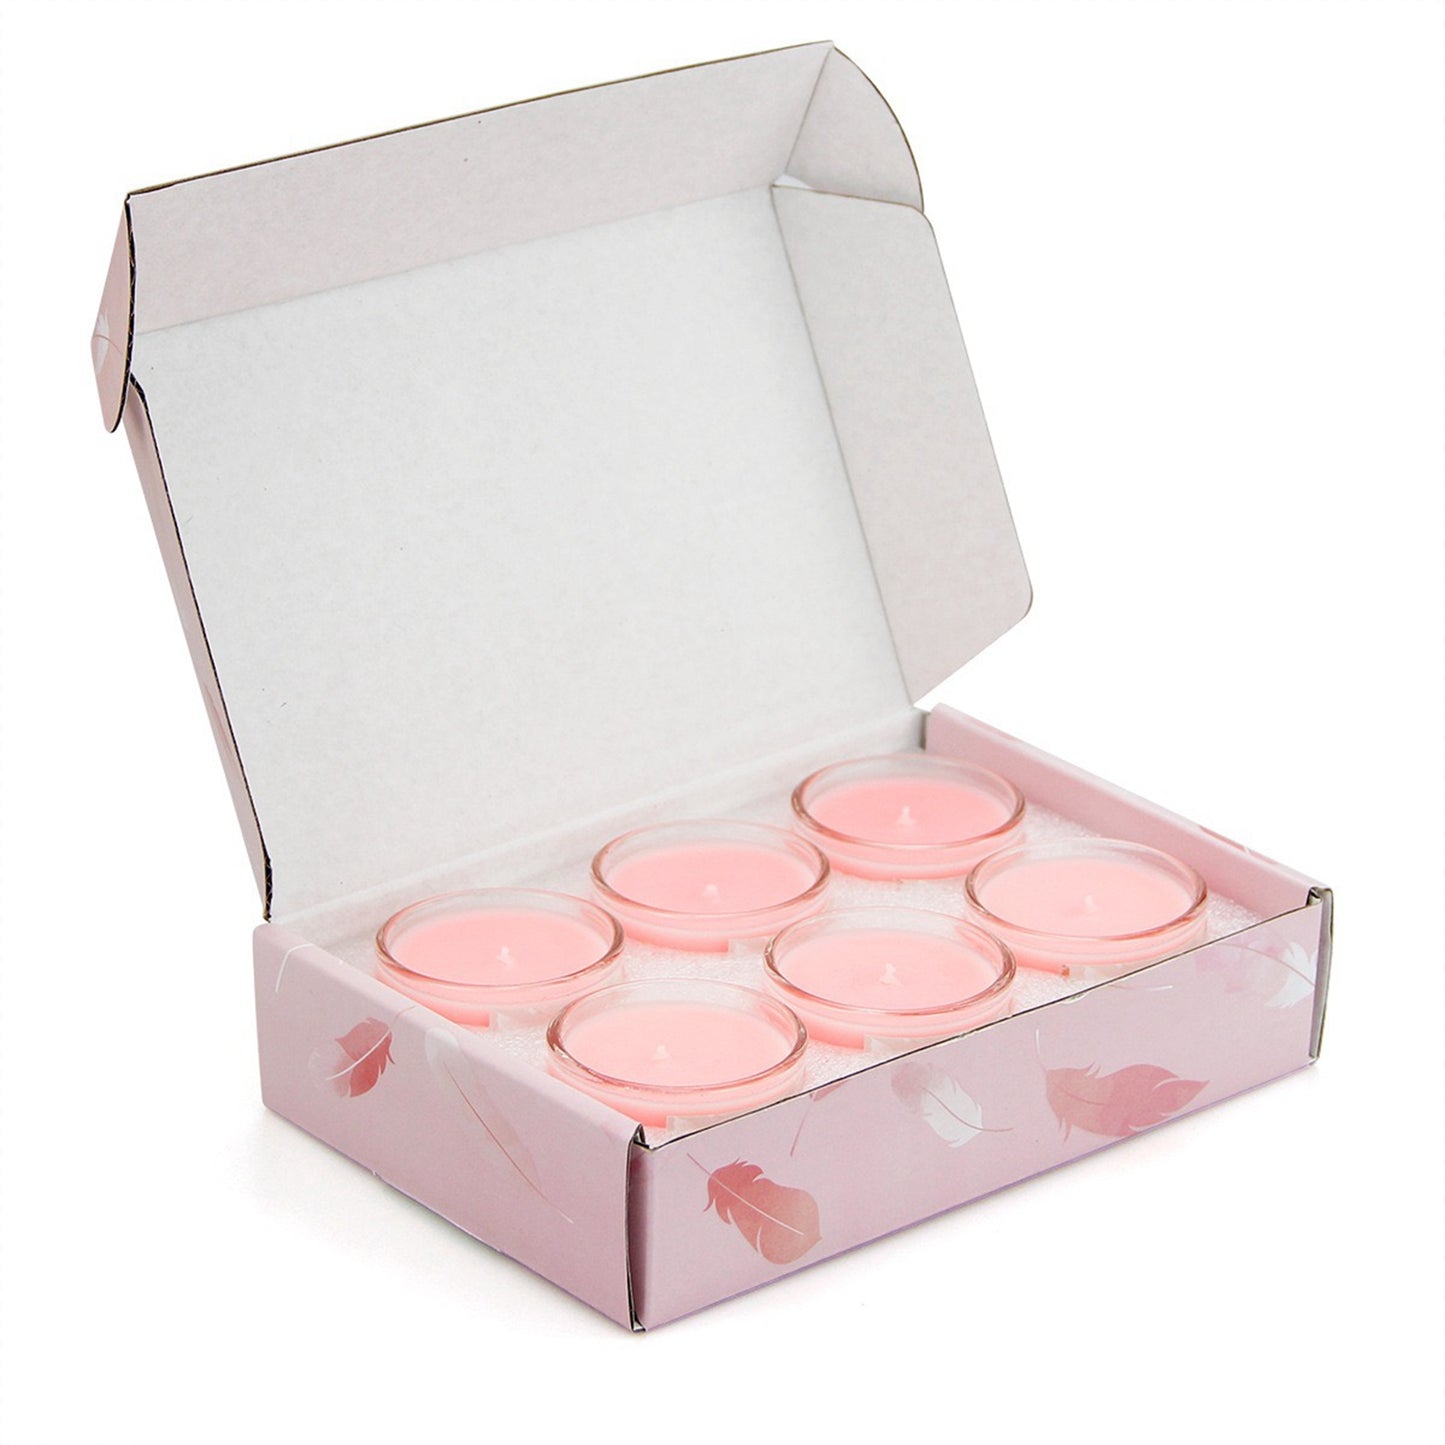 Christmas Natural Scented Candle Romantic Rose Scented Luxury Candle Set